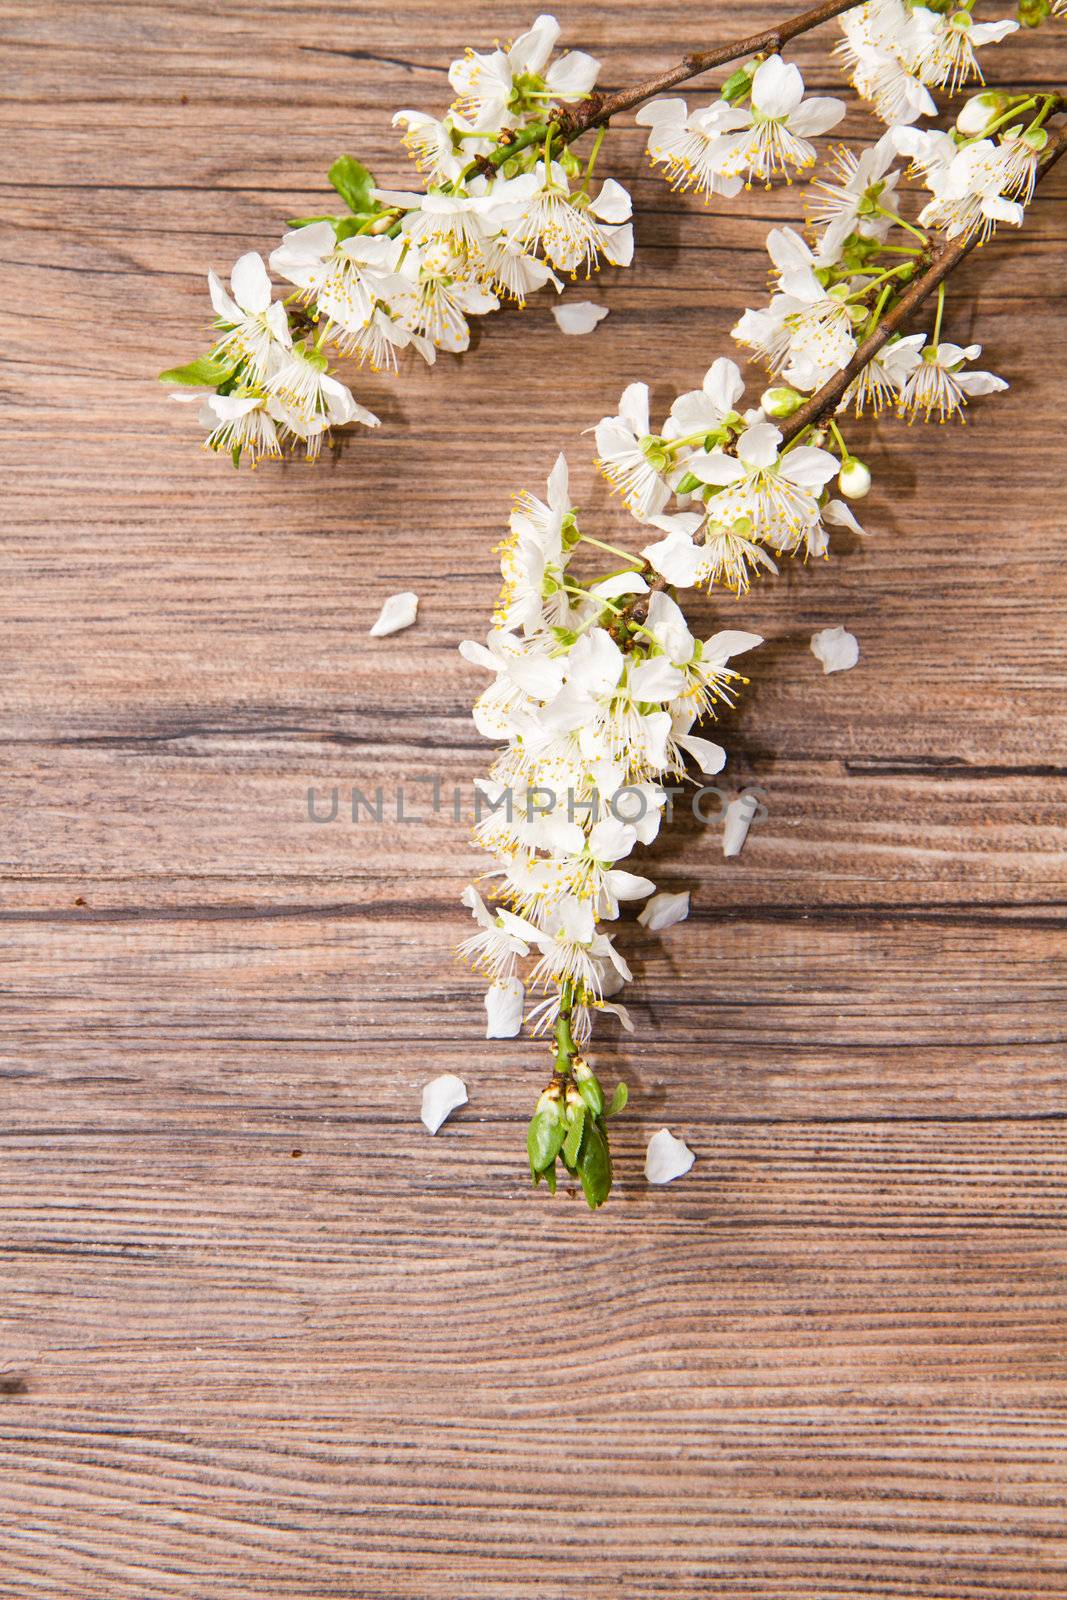 Wood background with spring flowers